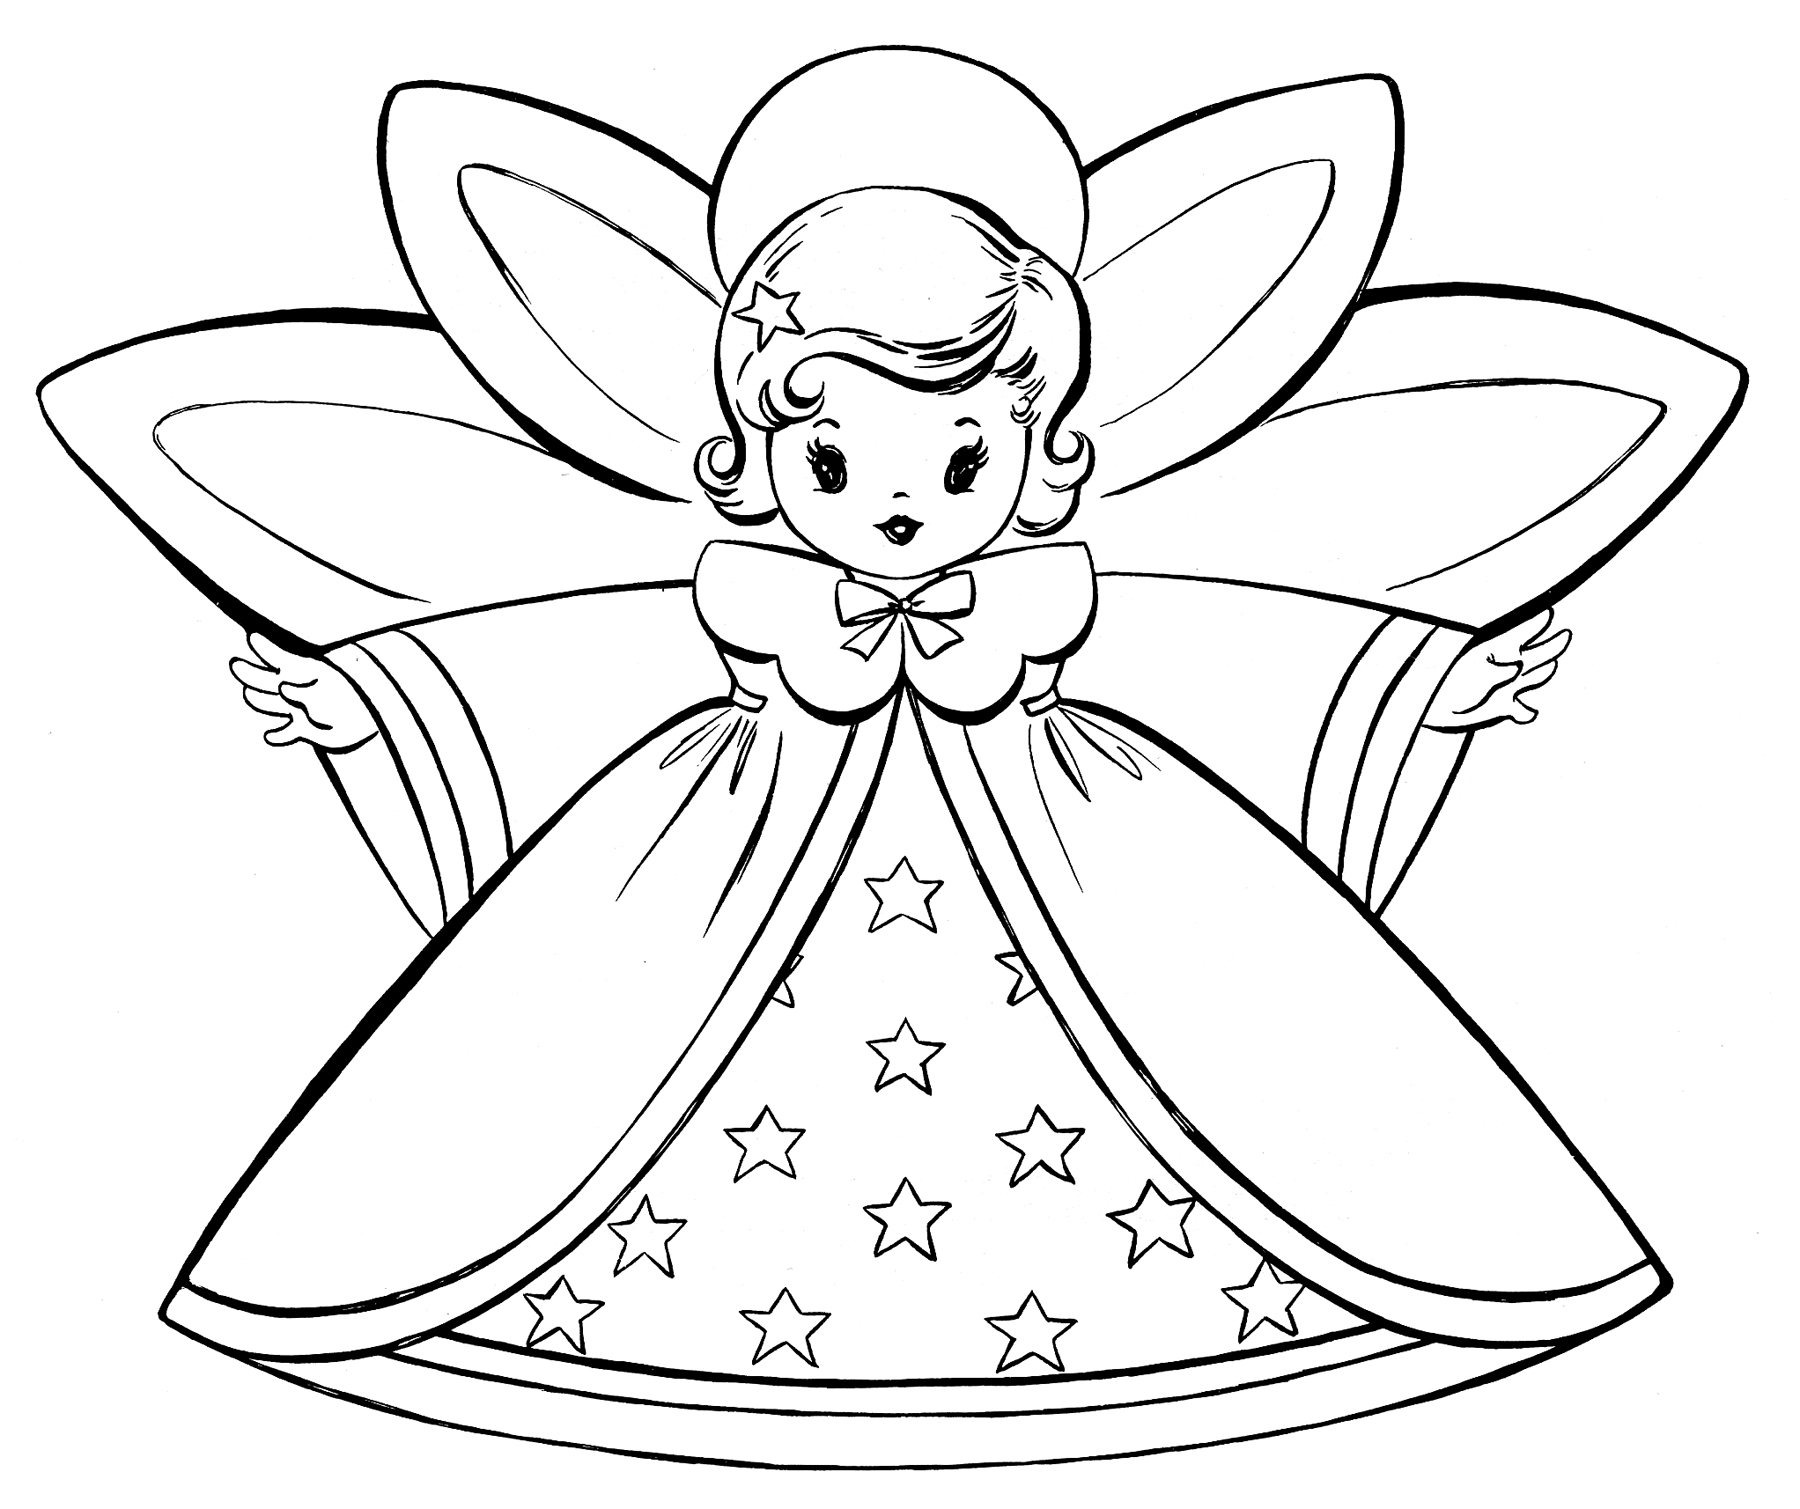 Free Christmas Coloring Pages   Retro Angels   The Graphics Fairy